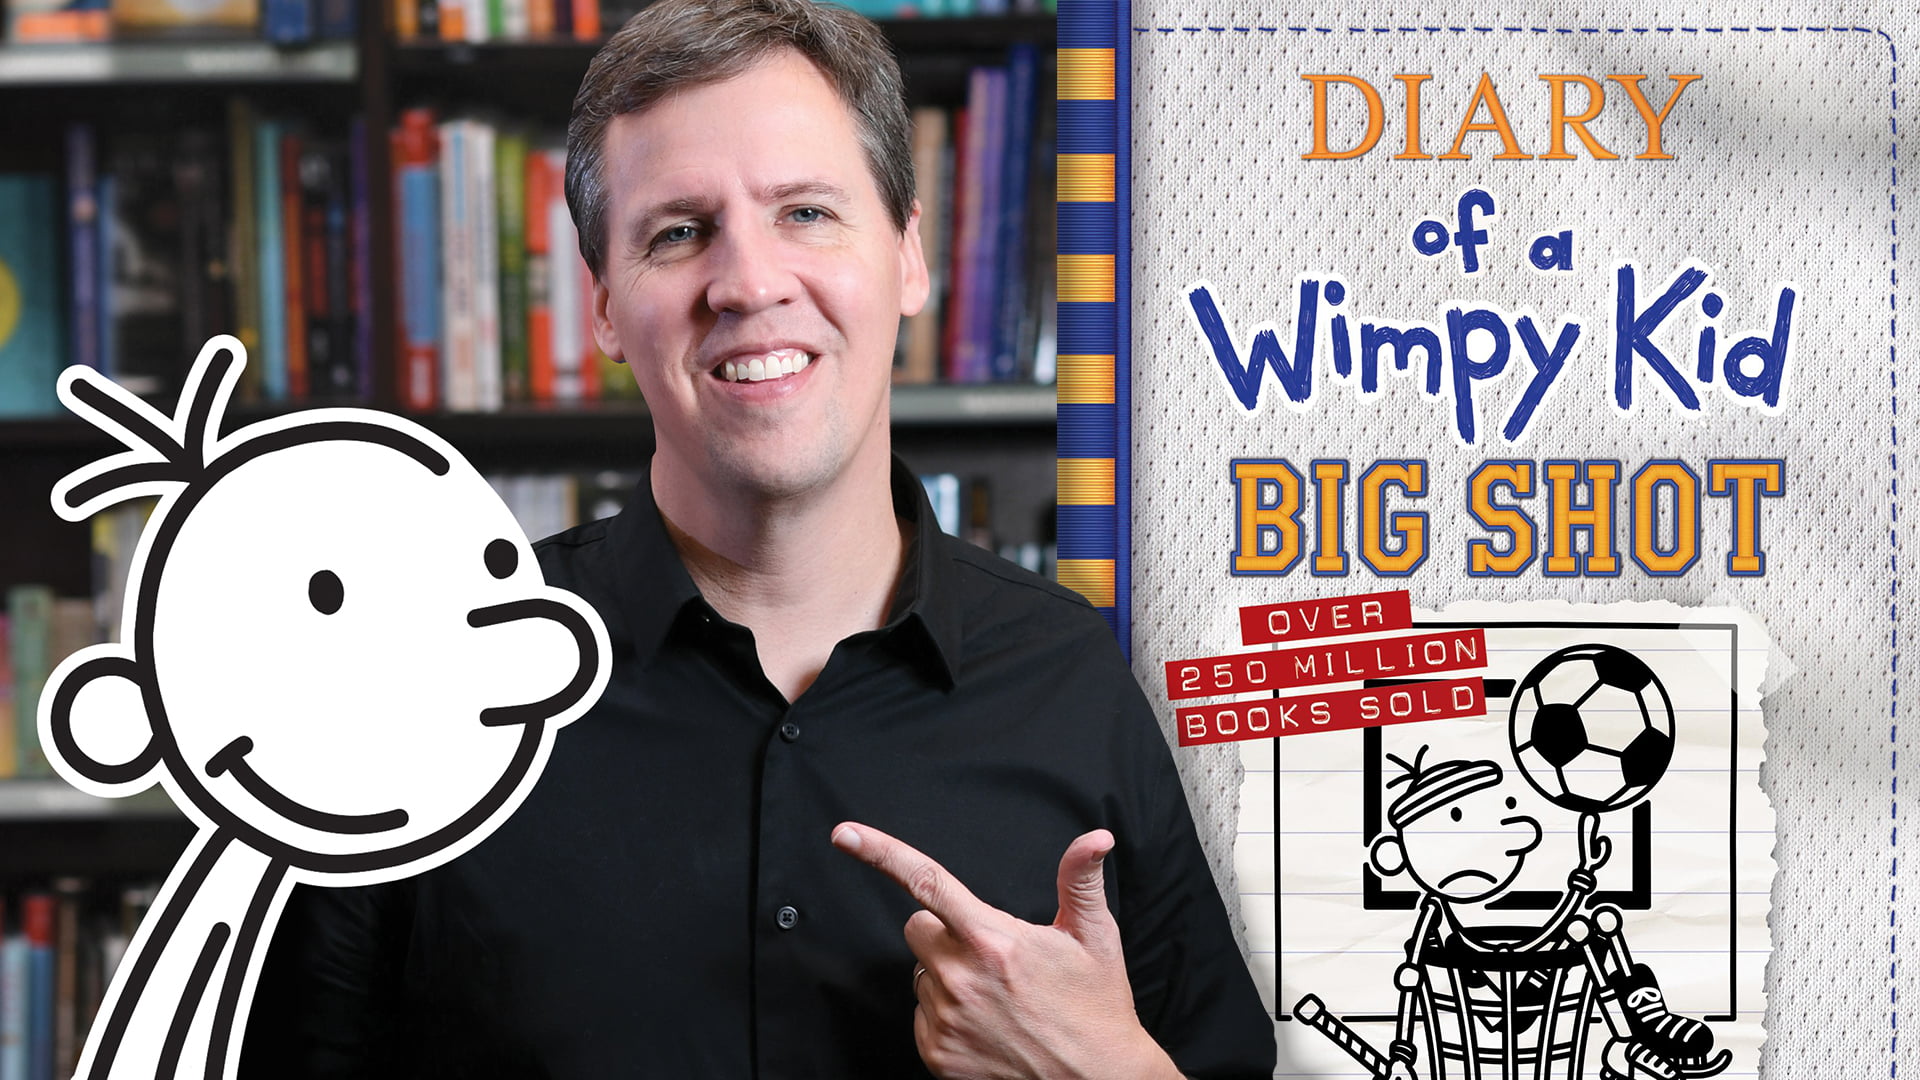 Meet “Diary of a Wimpy Kid” Author Jeff Kinney at His Big Shot Drive-Thru  Tour *SOLD OUT*